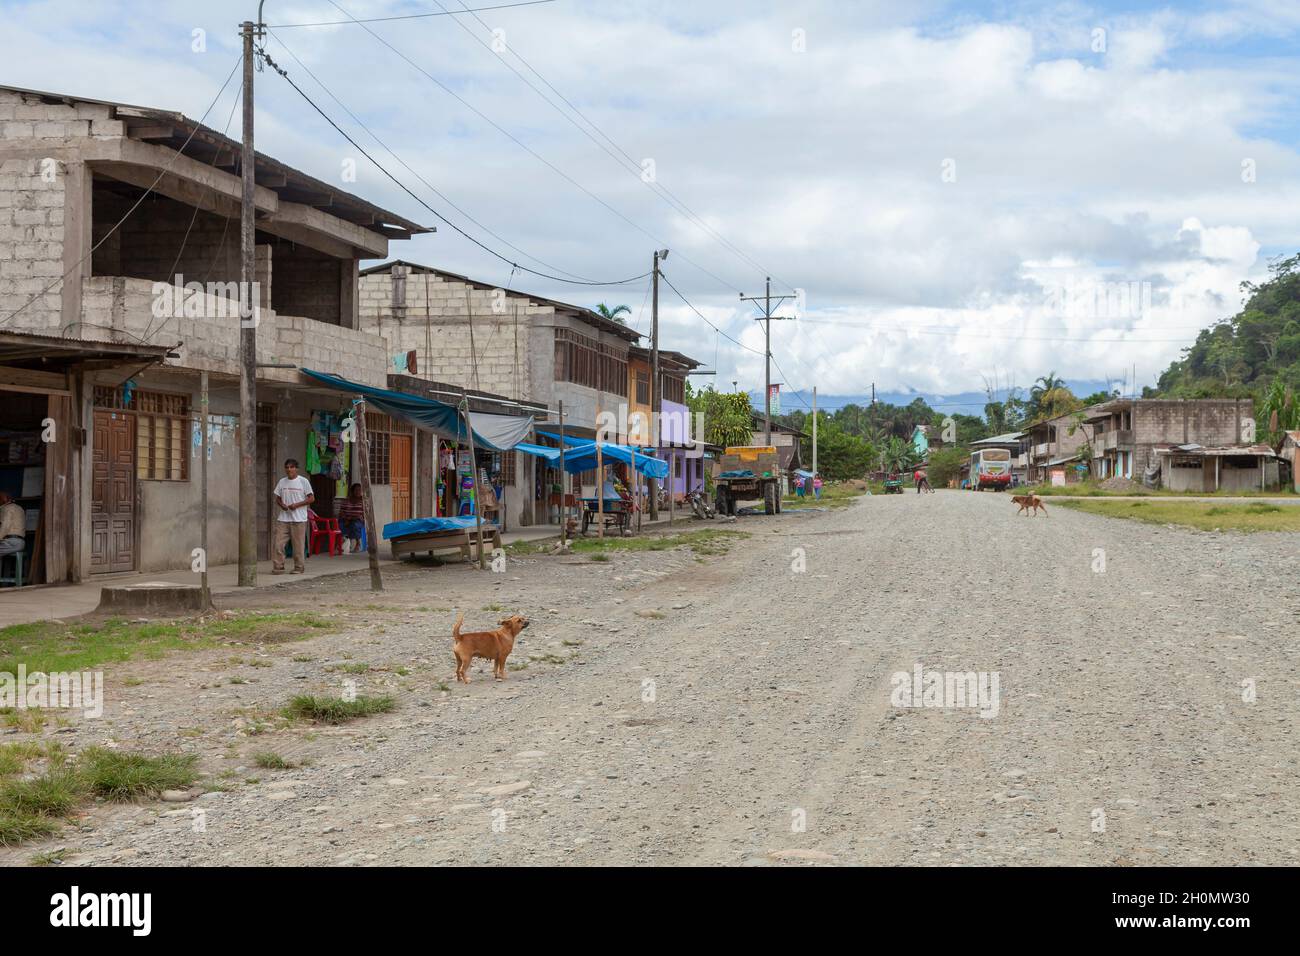 Pilcopata, Peru - April 10, 2014: Several houses in one of the neighborhoods of the small town of Pilcopata, line a dirt street Stock Photo